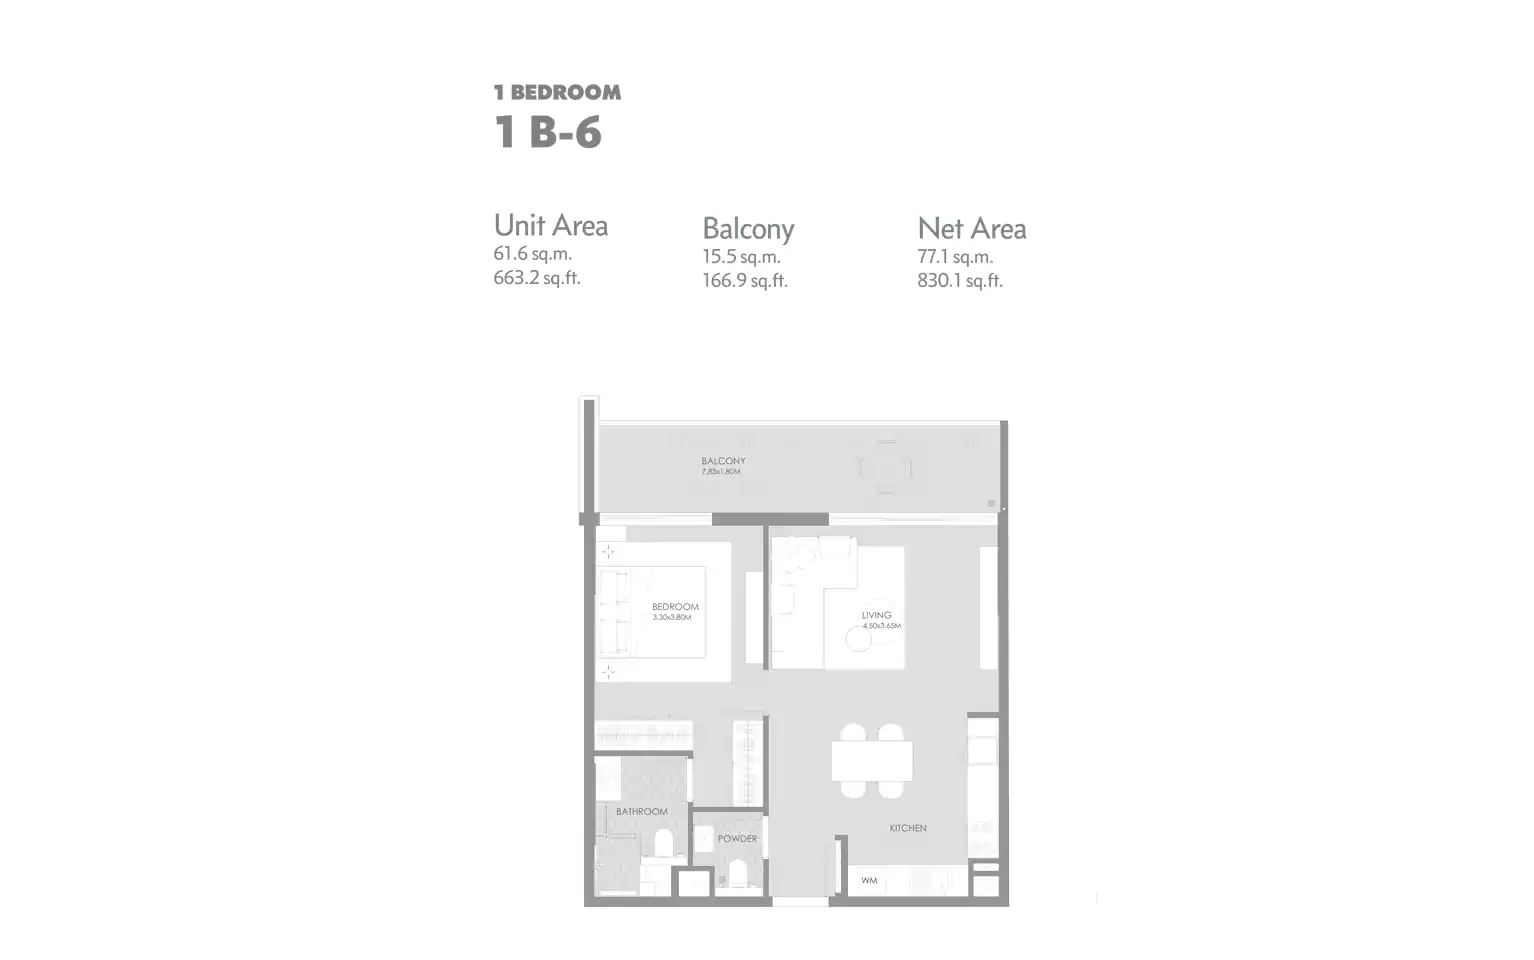 One Bedroom With Balcony 1B-6  Size : 663.2 Sq.ft.